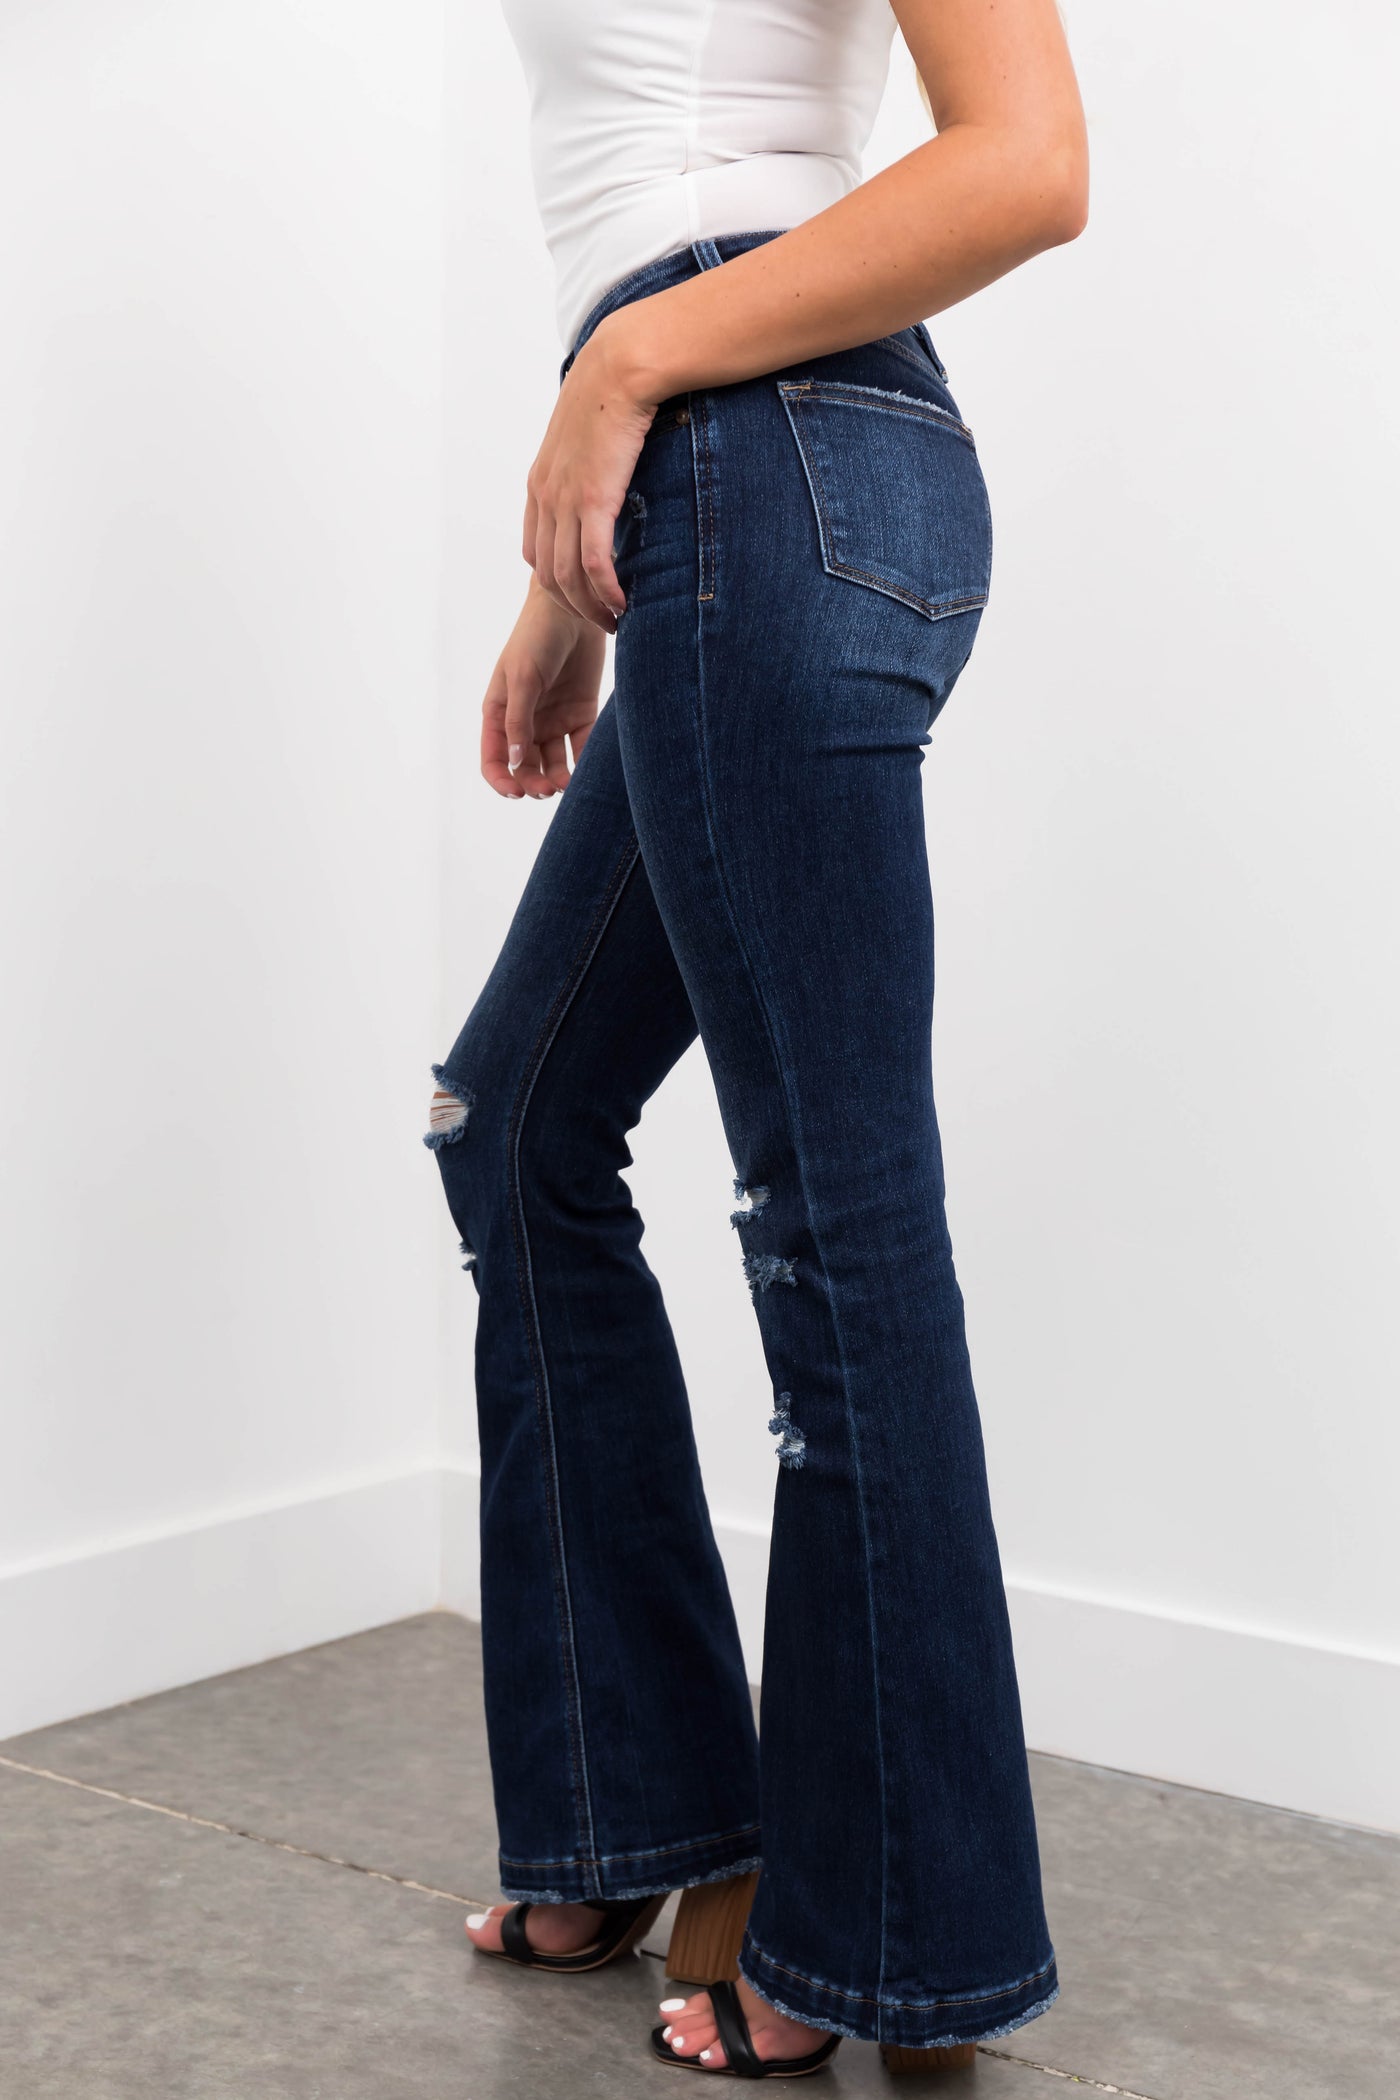 KanCan Dark Mid Rise Flare Jeans with Destroyed Knees